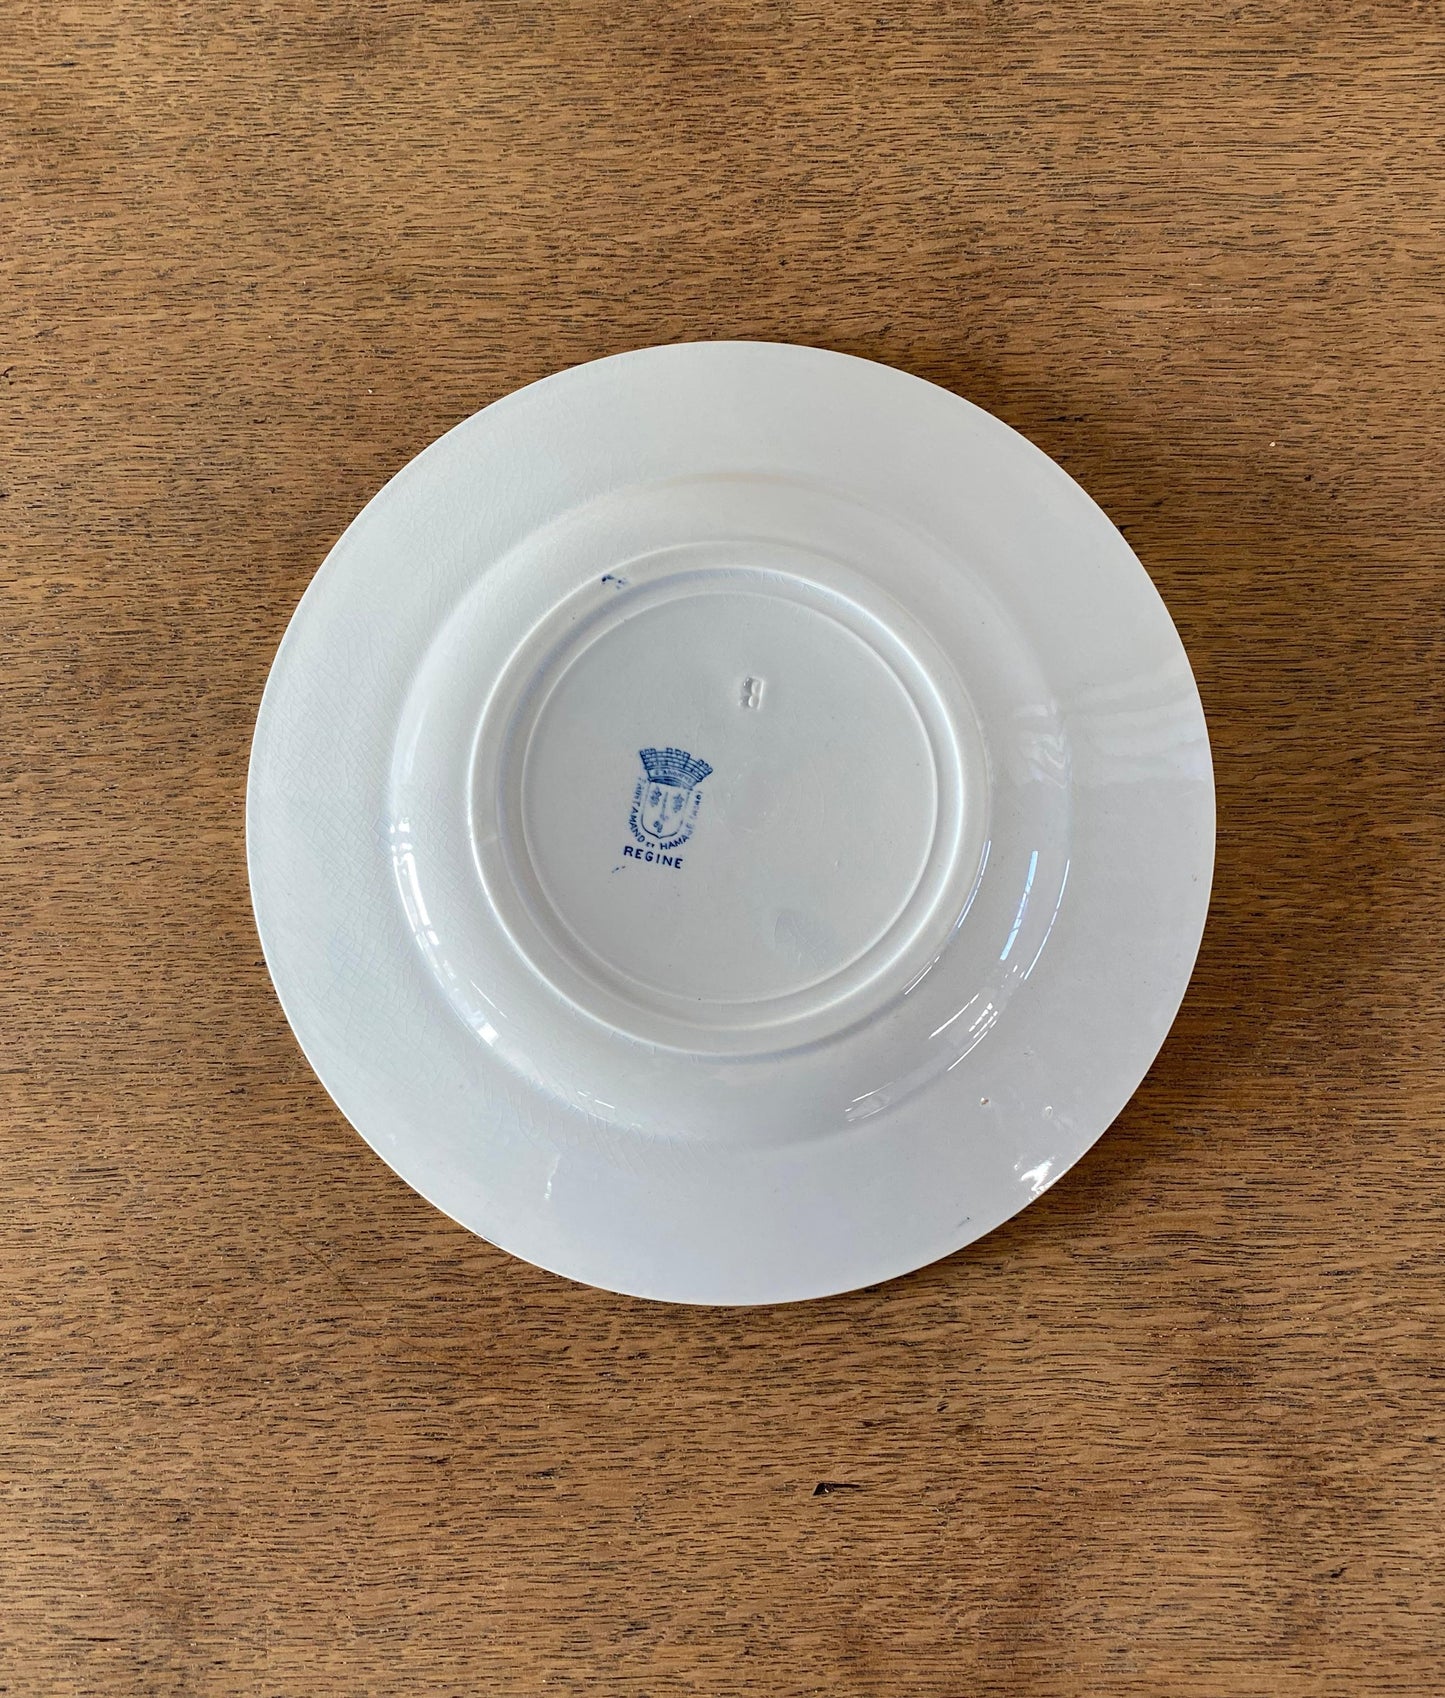 "St.Amand" Plate